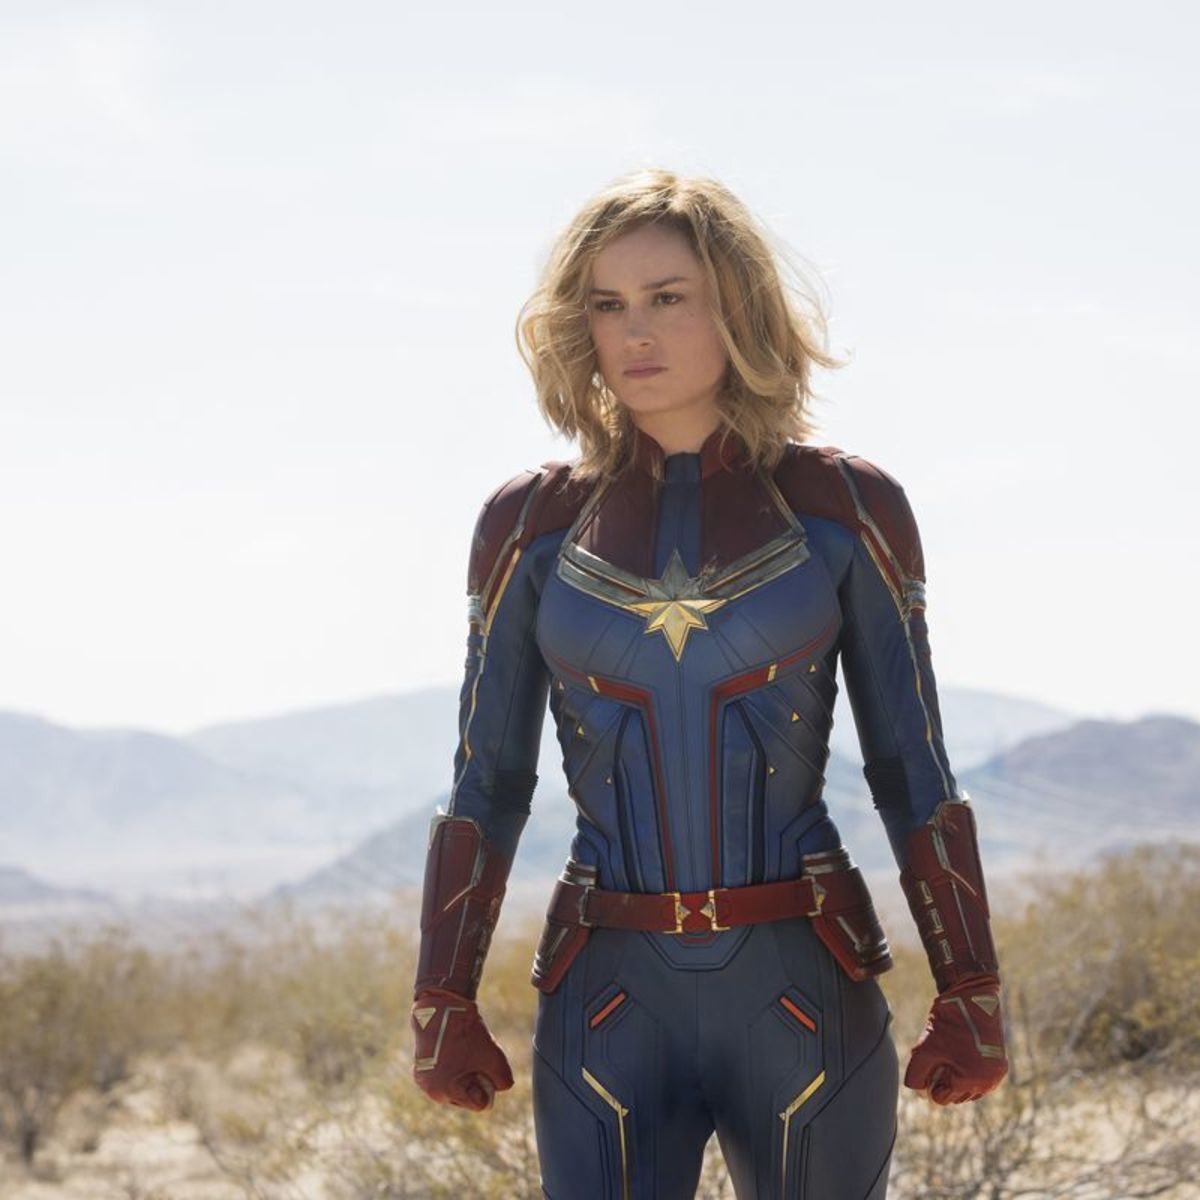 Brie Larson reveals another look at her Captain Marvel costume while